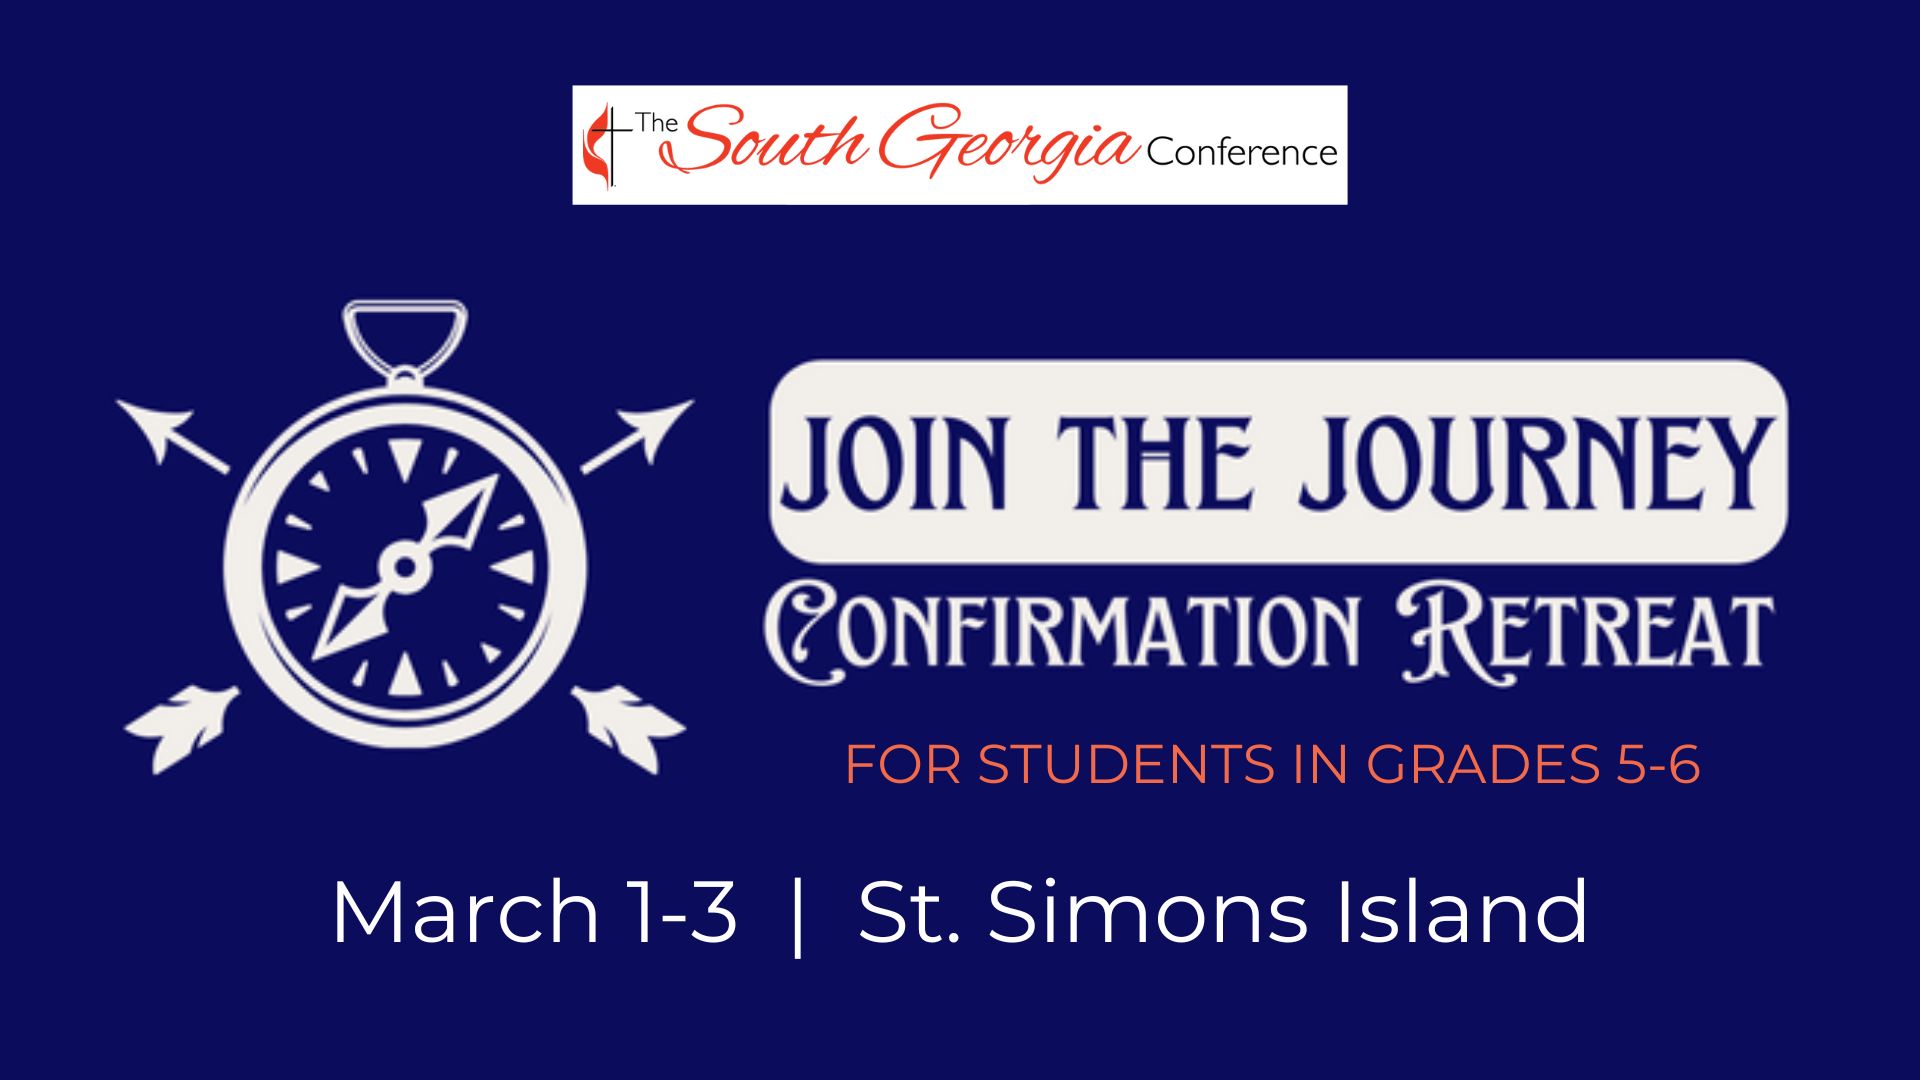 South Georgia Conference logo and Join the Journey Confirmation Retreat logo, featuring the image of a compass